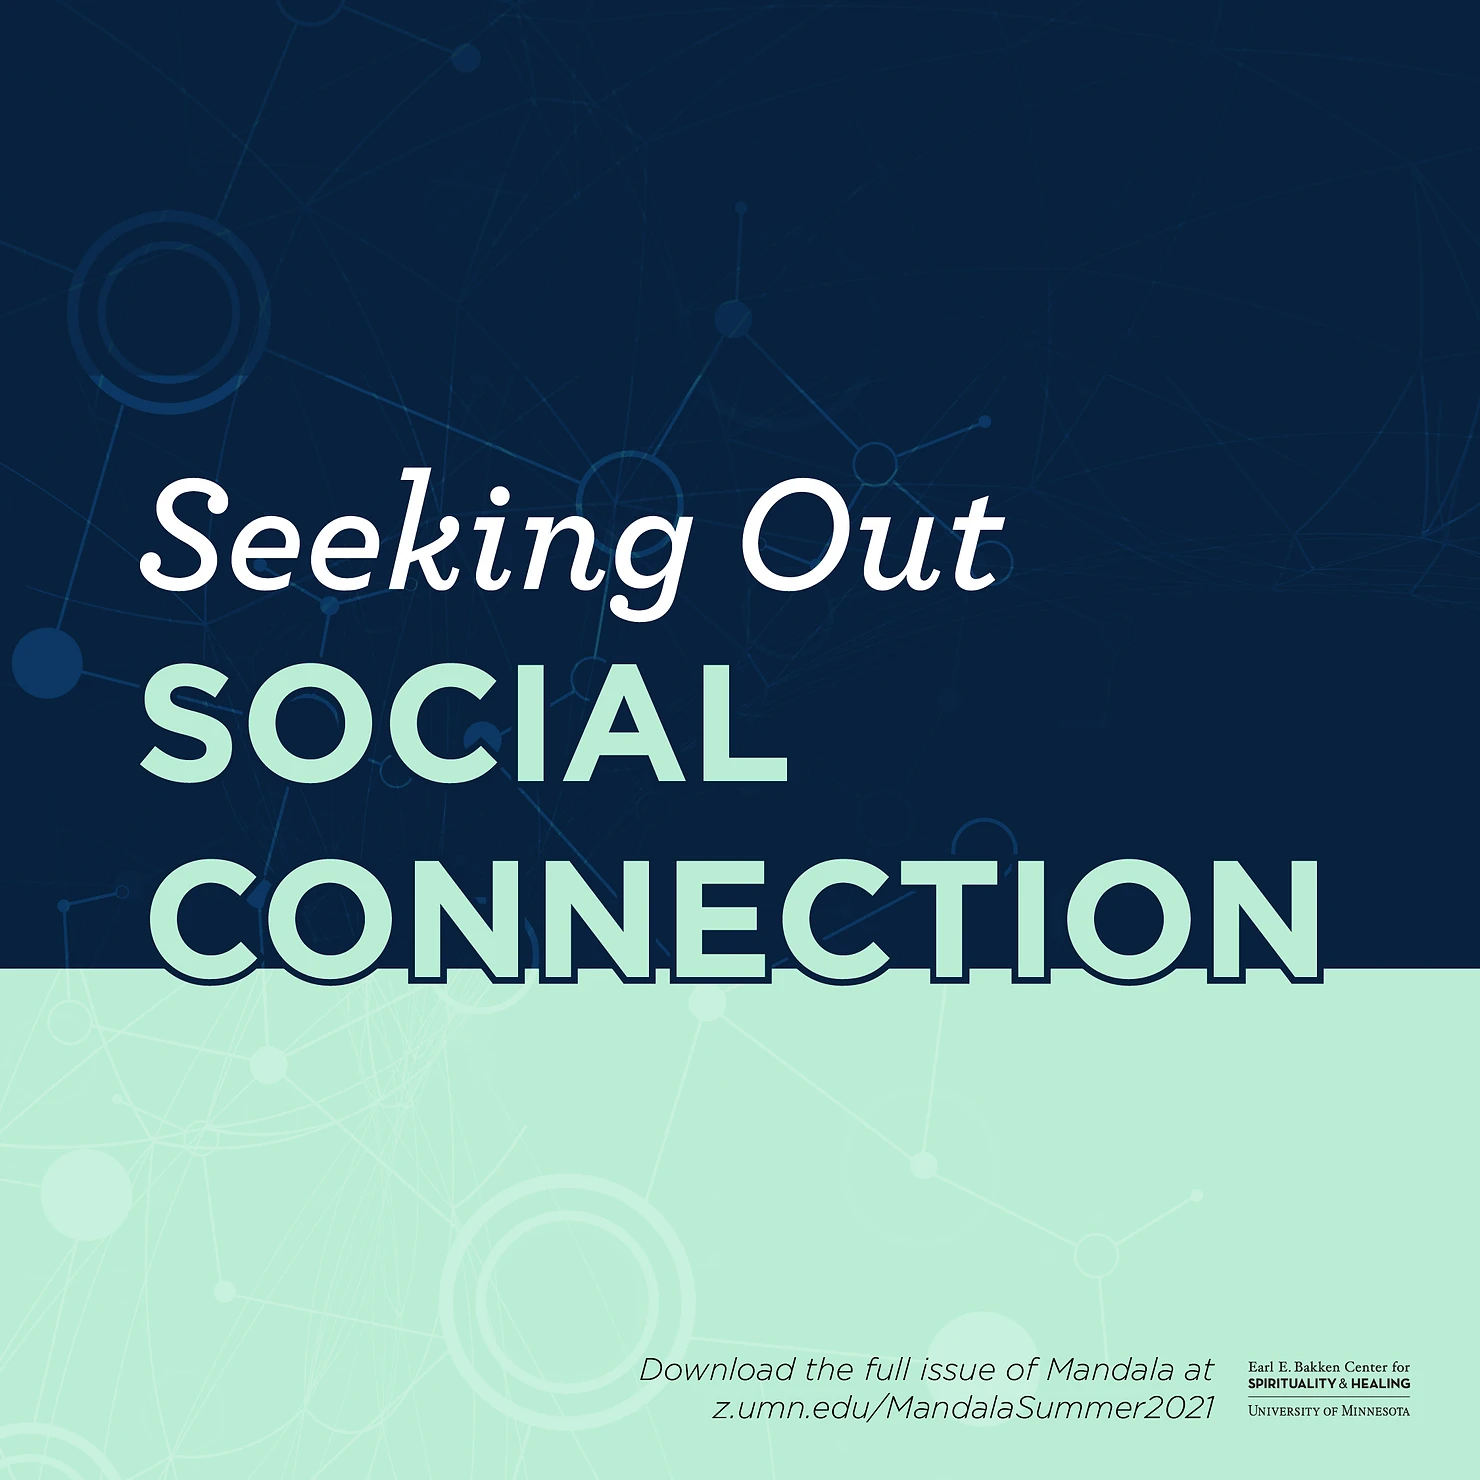 "Seeking out Social Connection"